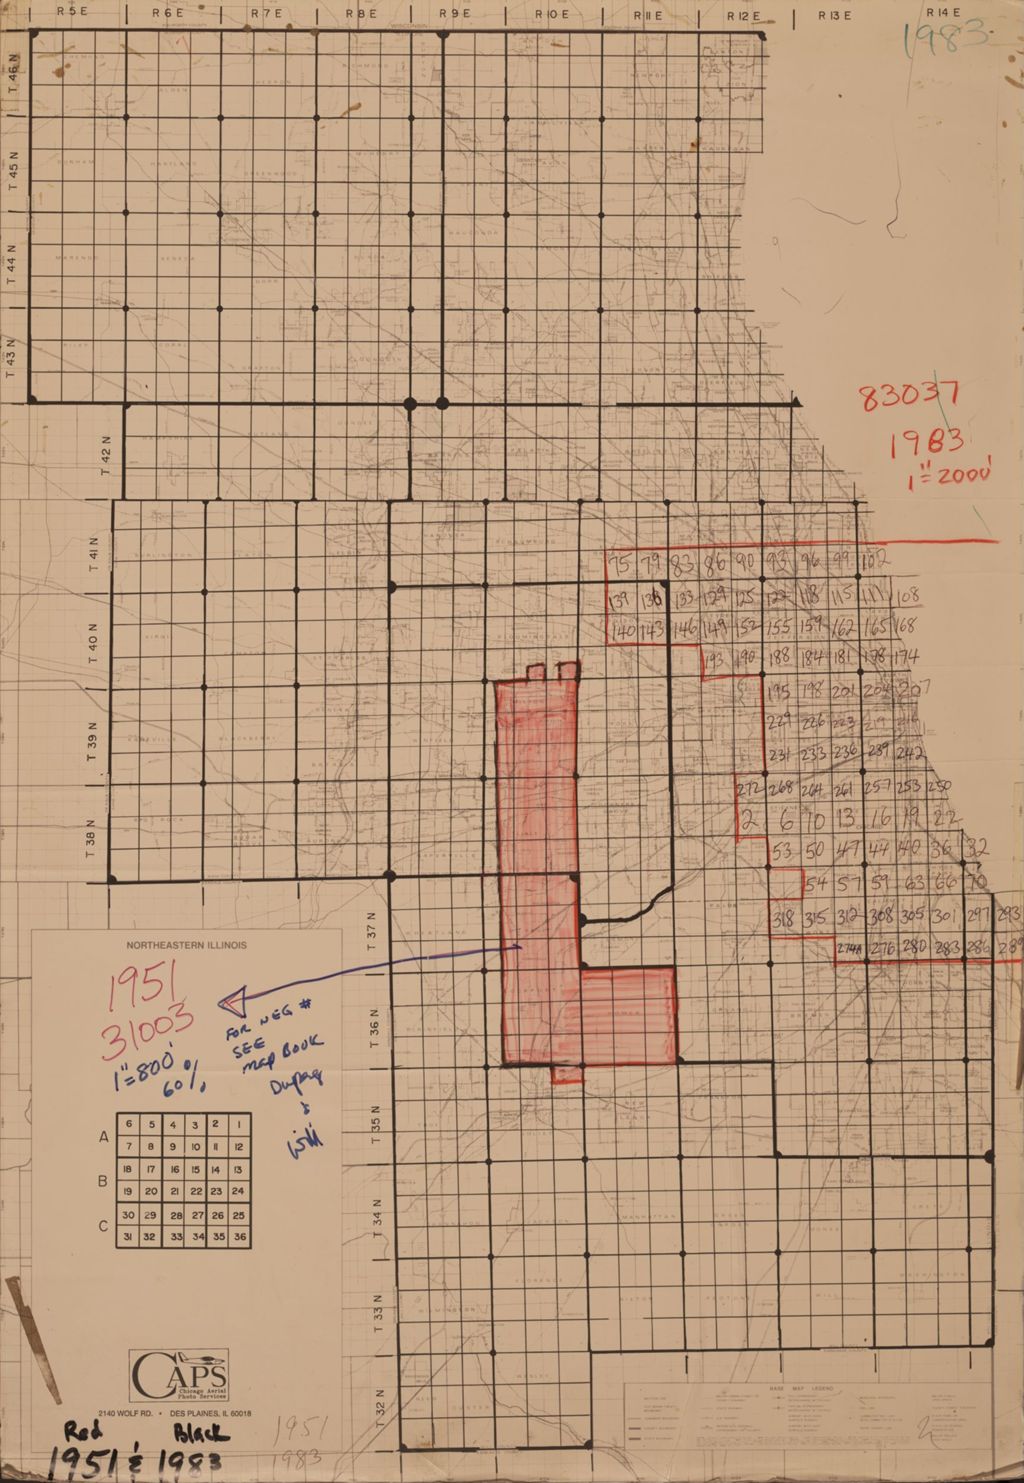 Miniature of Aerial survey index maps for 1951 and 1983 surveys of the Chicago area (31003 and 83037)